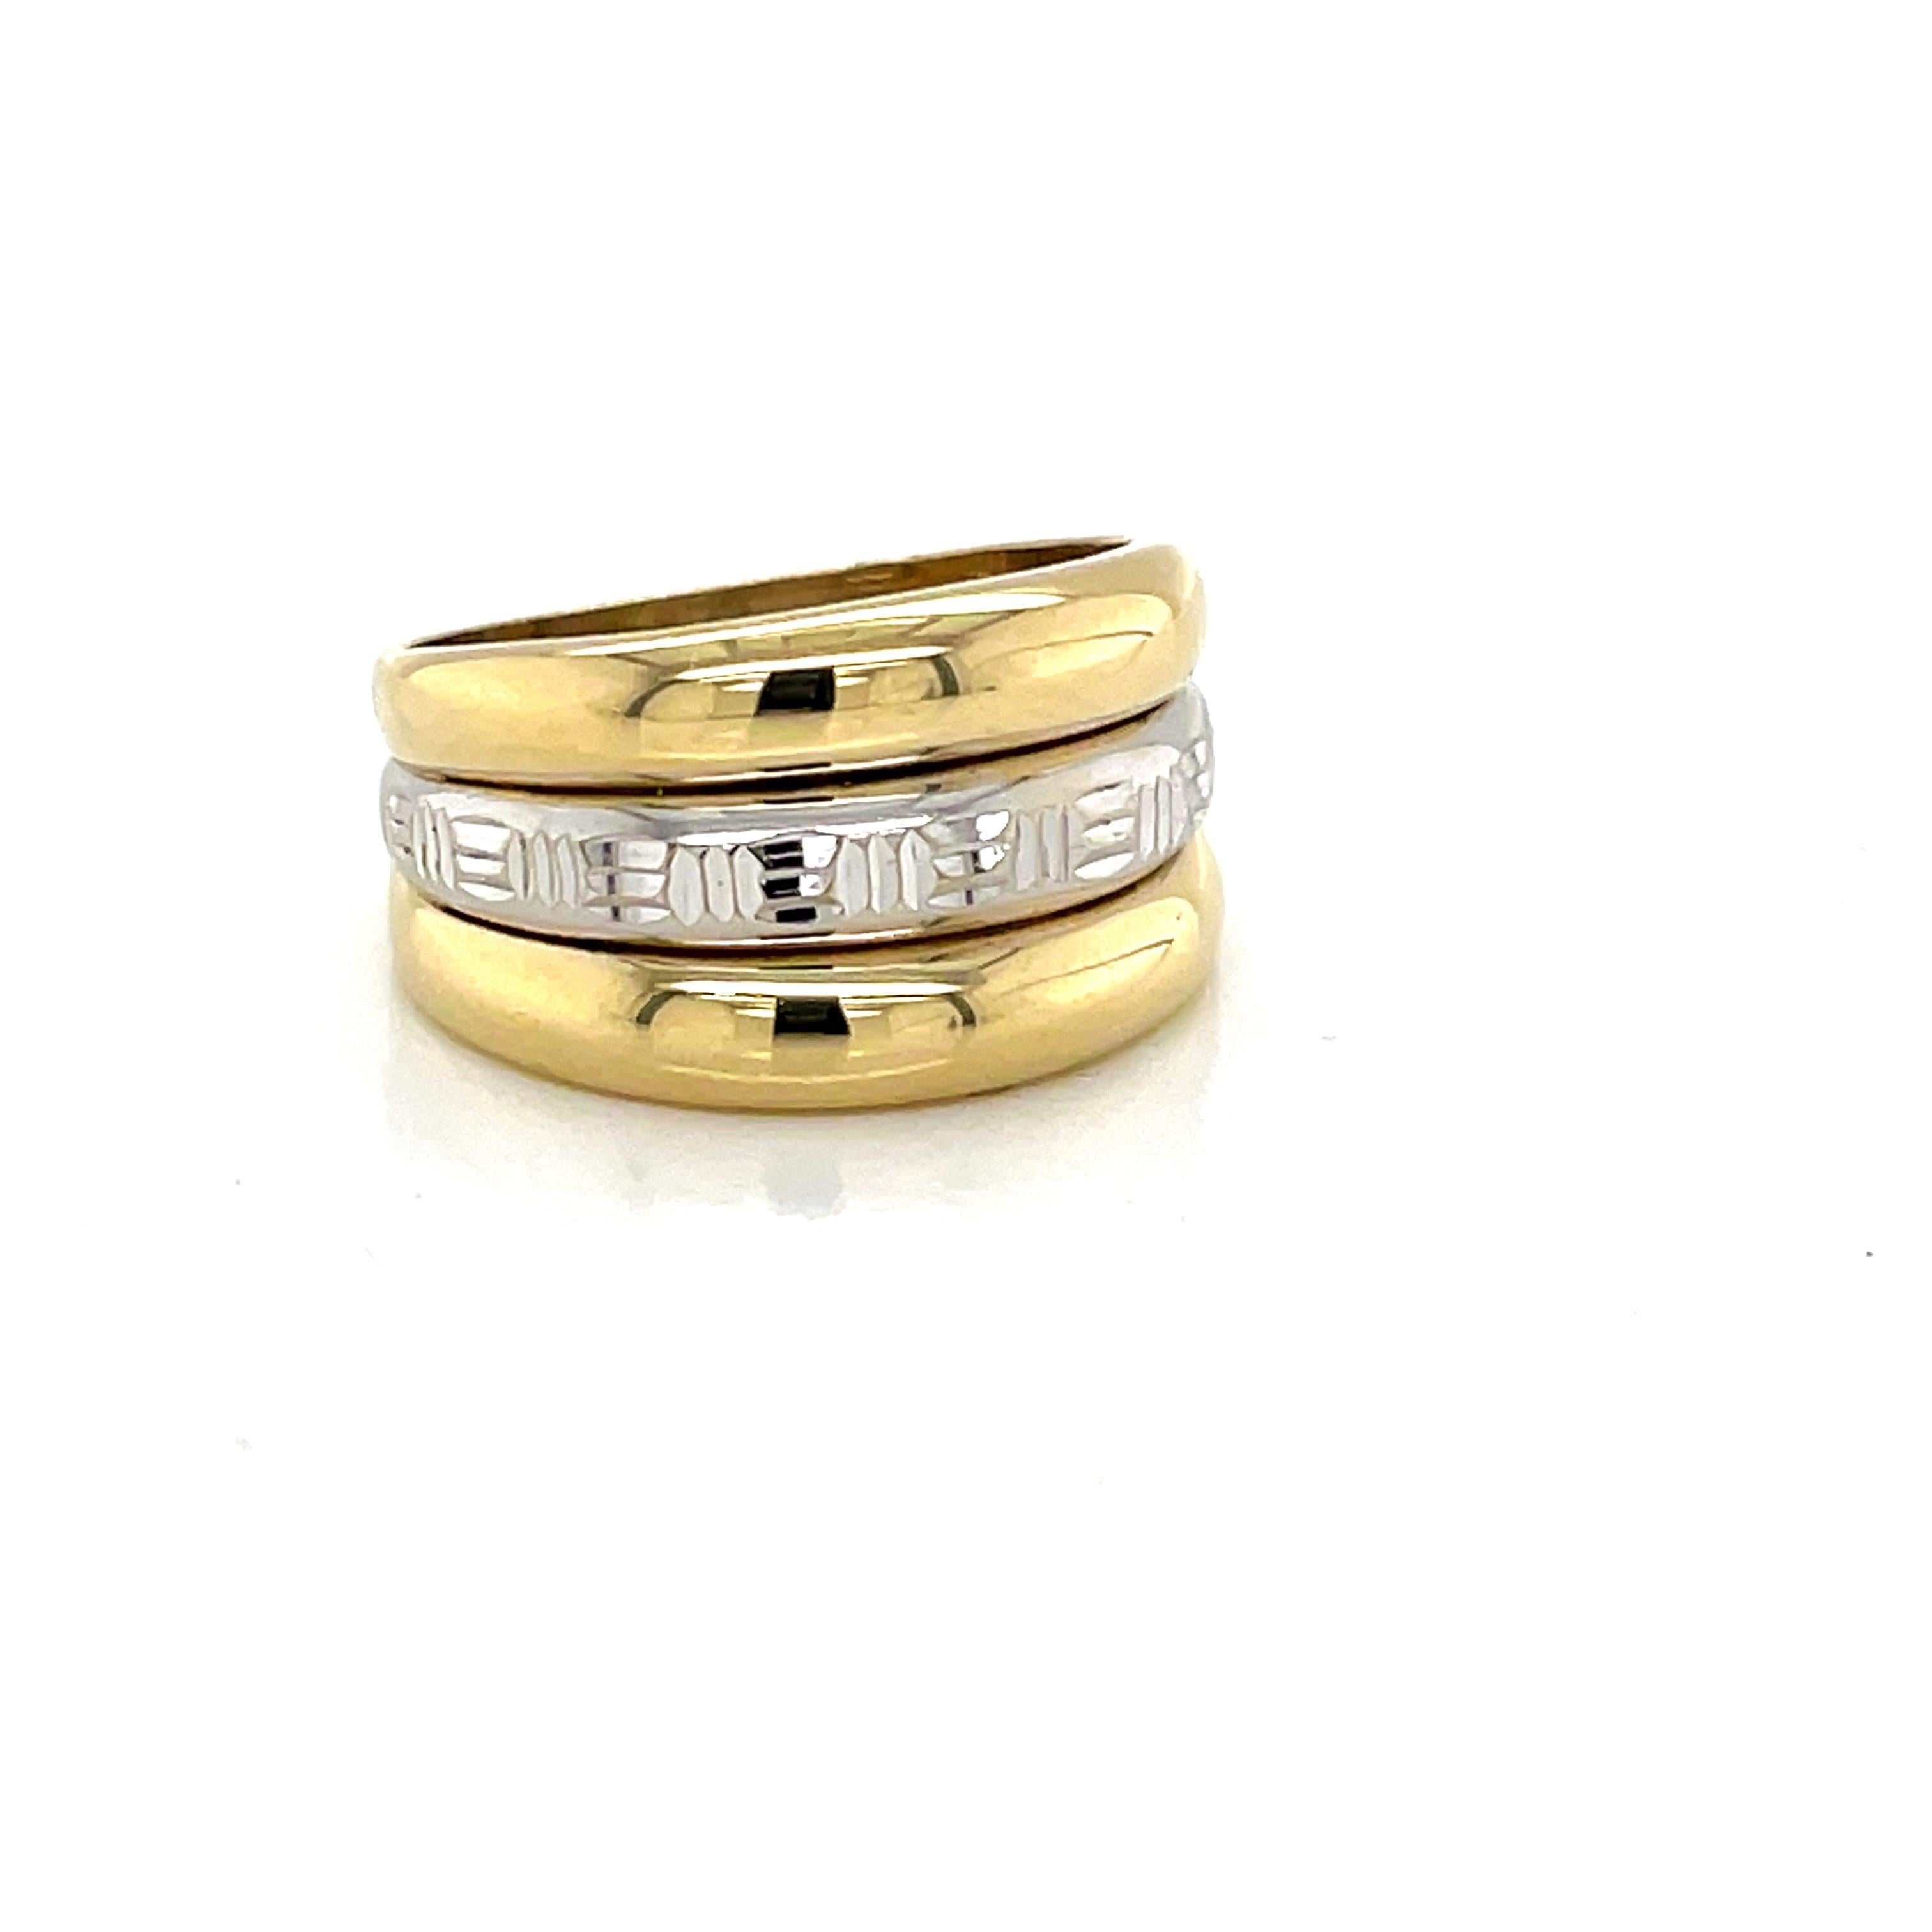 Two Tone 14 Karat Gold Band Ring W Greek Key Detail In Good Condition For Sale In Mount Kisco, NY